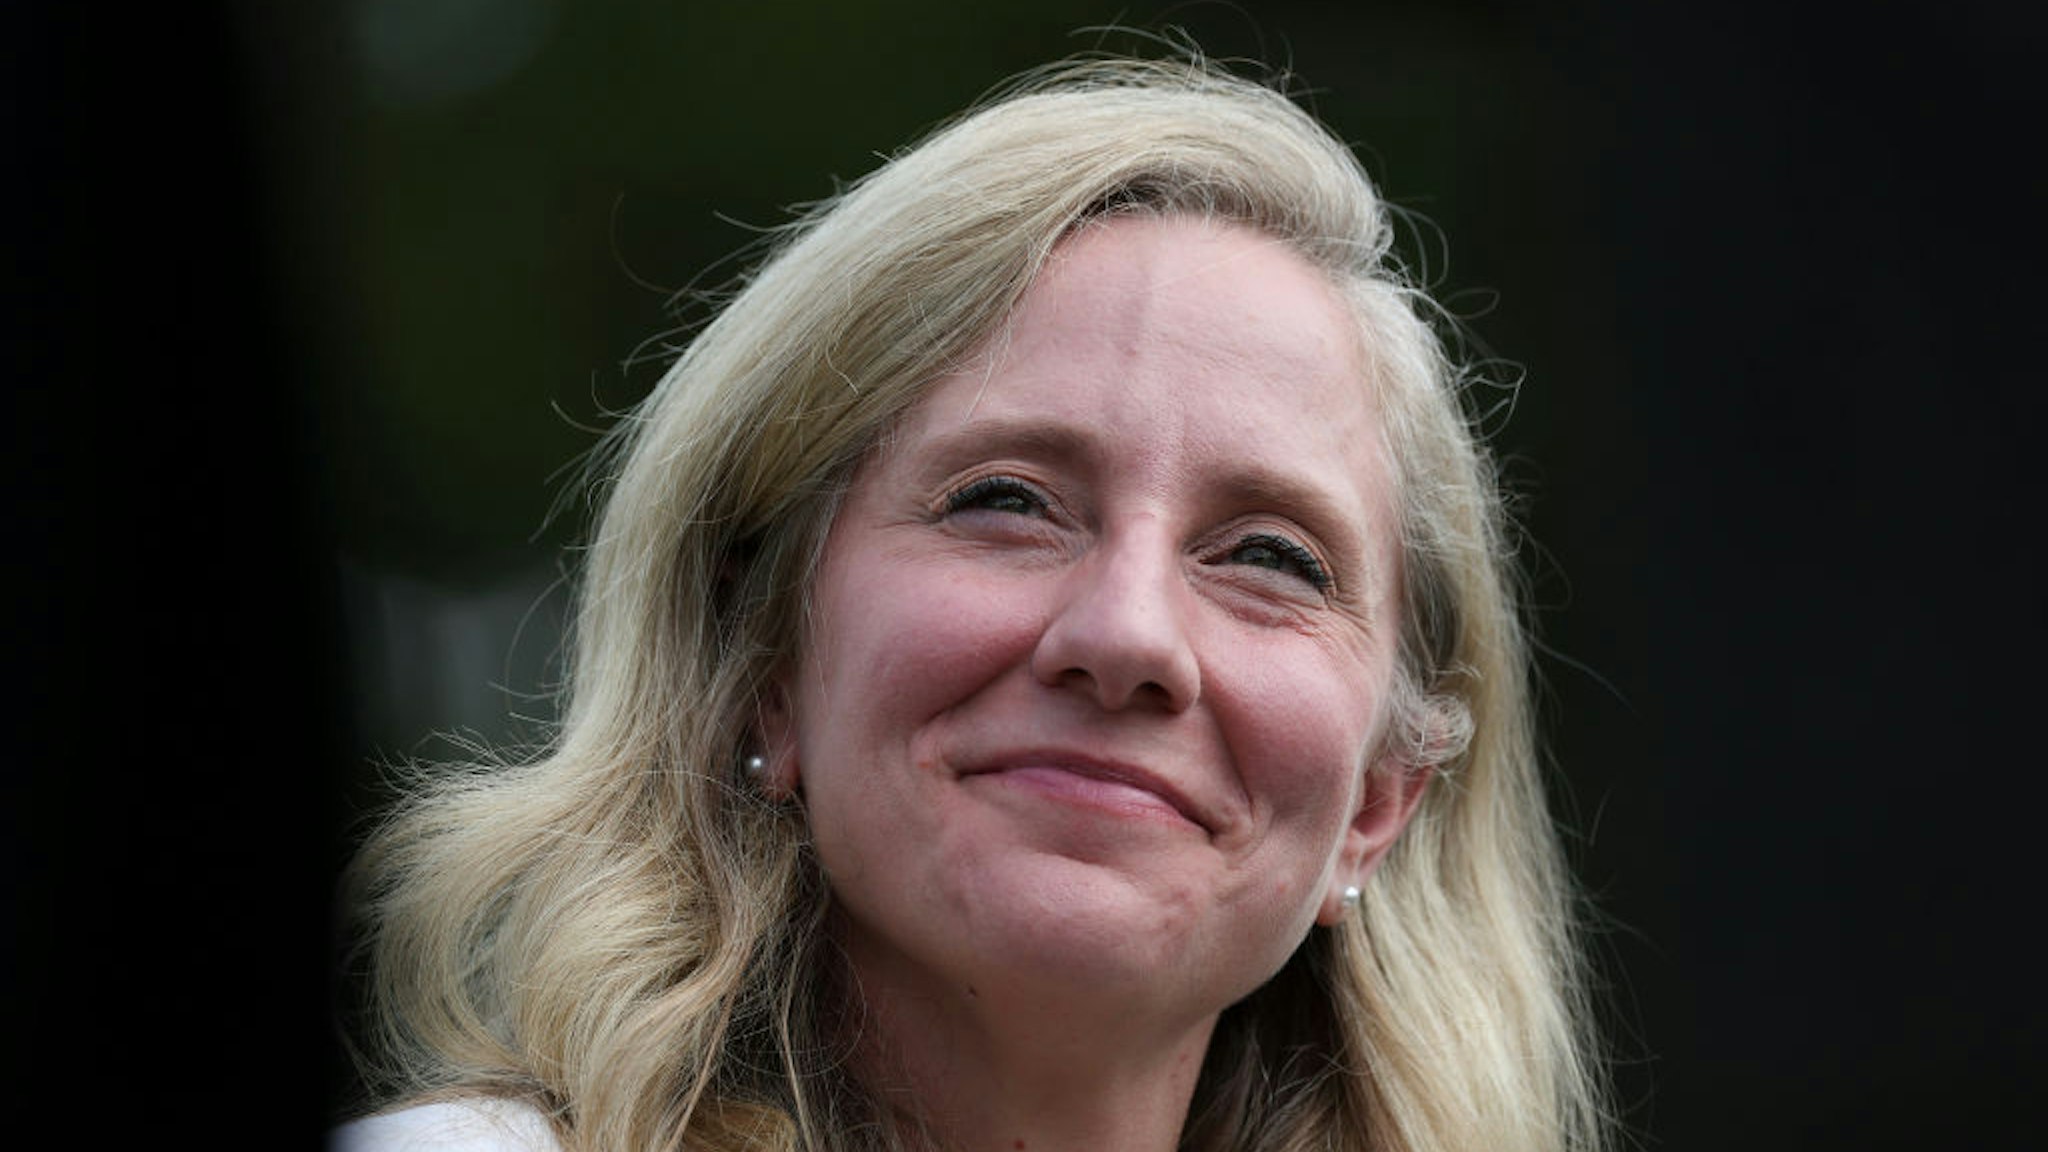 FREDERICKSBURG, VIRGINIA - AUGUST 25: U.S. Rep. Abigail Spanberger (D-VA) attends a press conference August 25, 2022 at the Mary Washington Hospital in Fredericksburg, Virginia. Spanberger joined with local healthcare leaders and state residents living with chronic diseases to discuss how the recently passed Inflation Reduction Act will impact drug costs for seniors and extend health insurance tax credits for middle-class families. (Photo by Win McNamee/Getty Images)